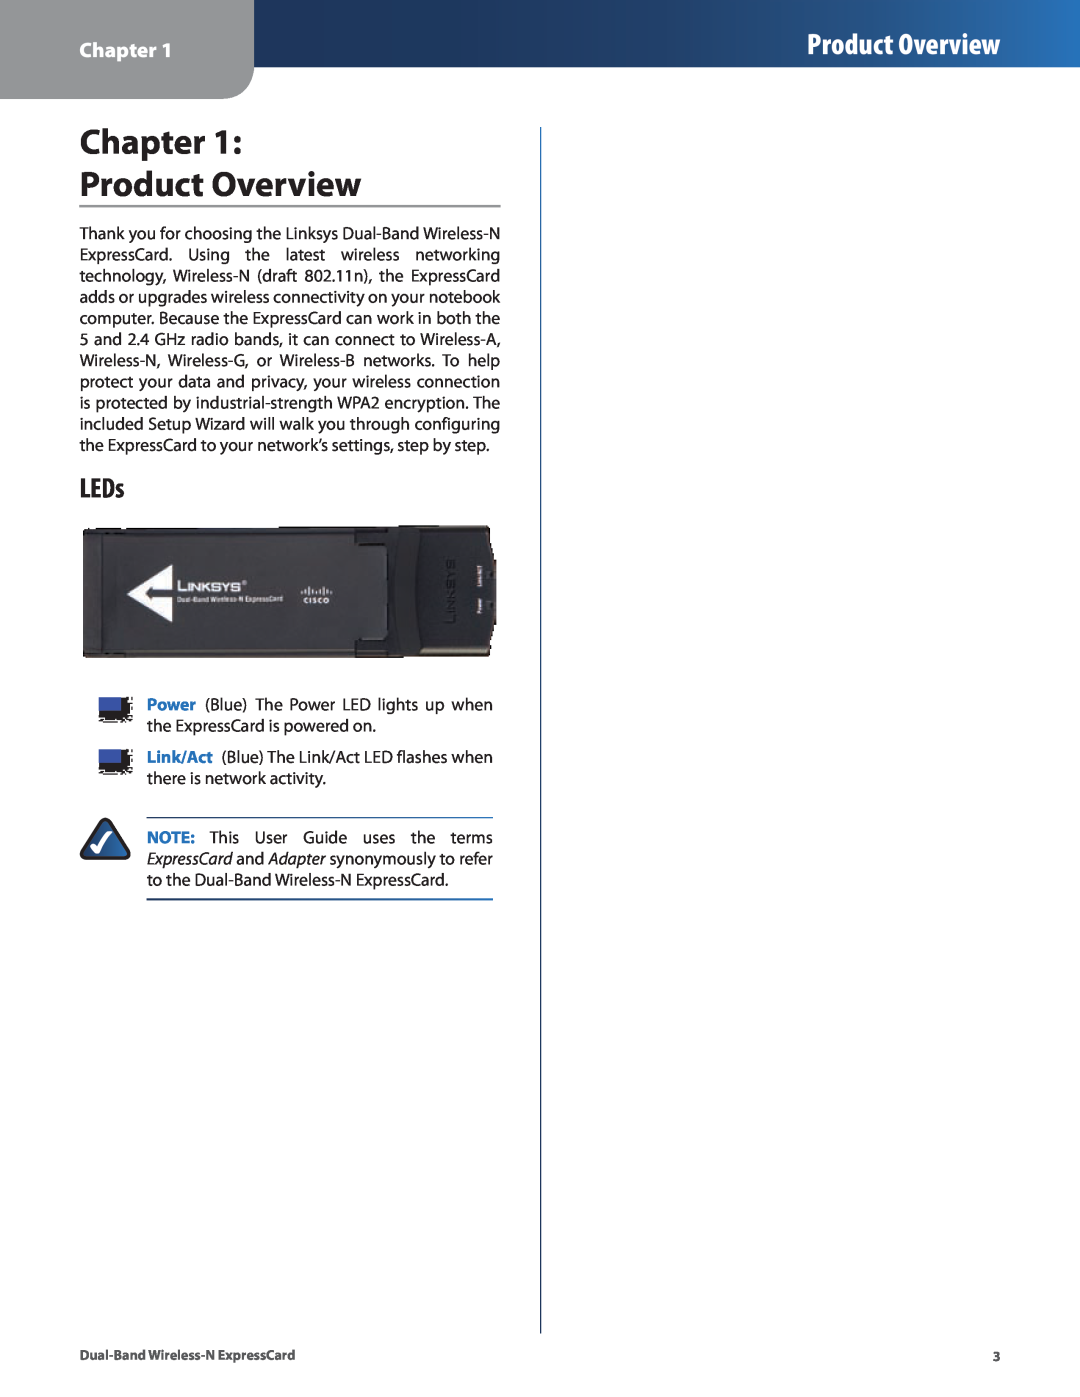 Cisco Systems WEC600N manual Chapter Product Overview, LEDs, Dual-Band Wireless-N ExpressCard 